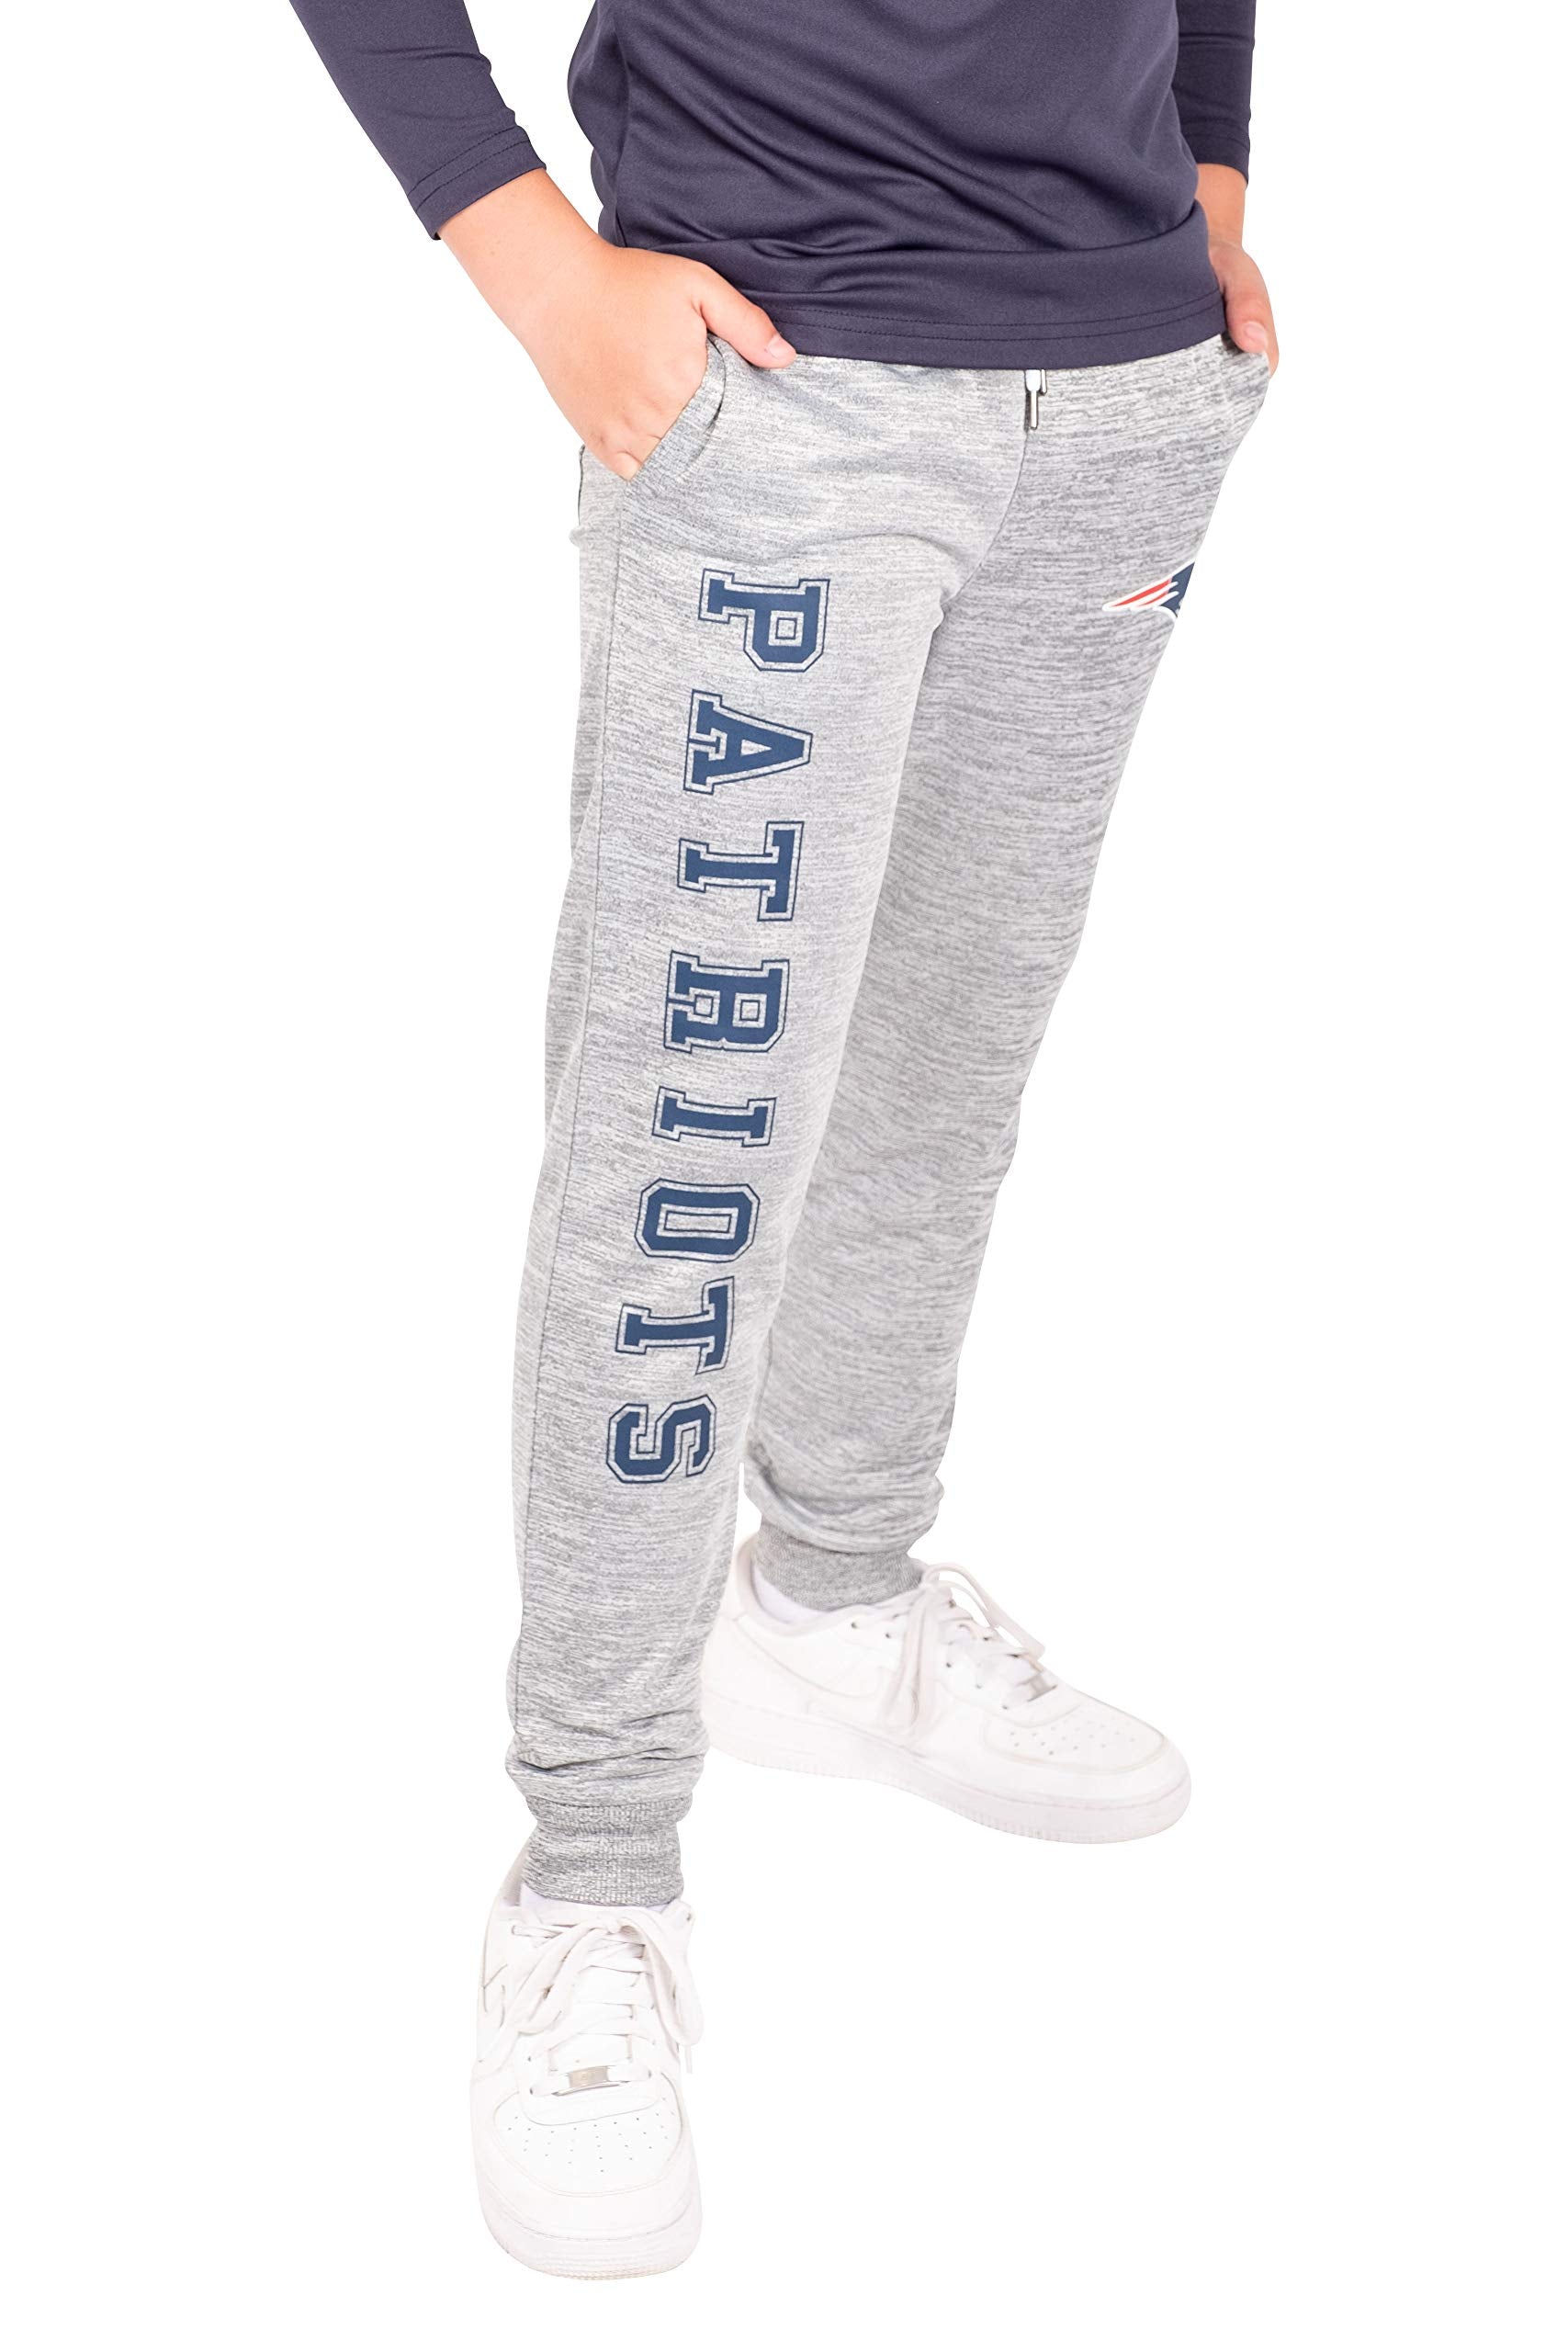 Ultra Game NFL New England Patriots Youth High Performance Moisture Wicking Fleece Jogger Sweatpants|New England Patriots